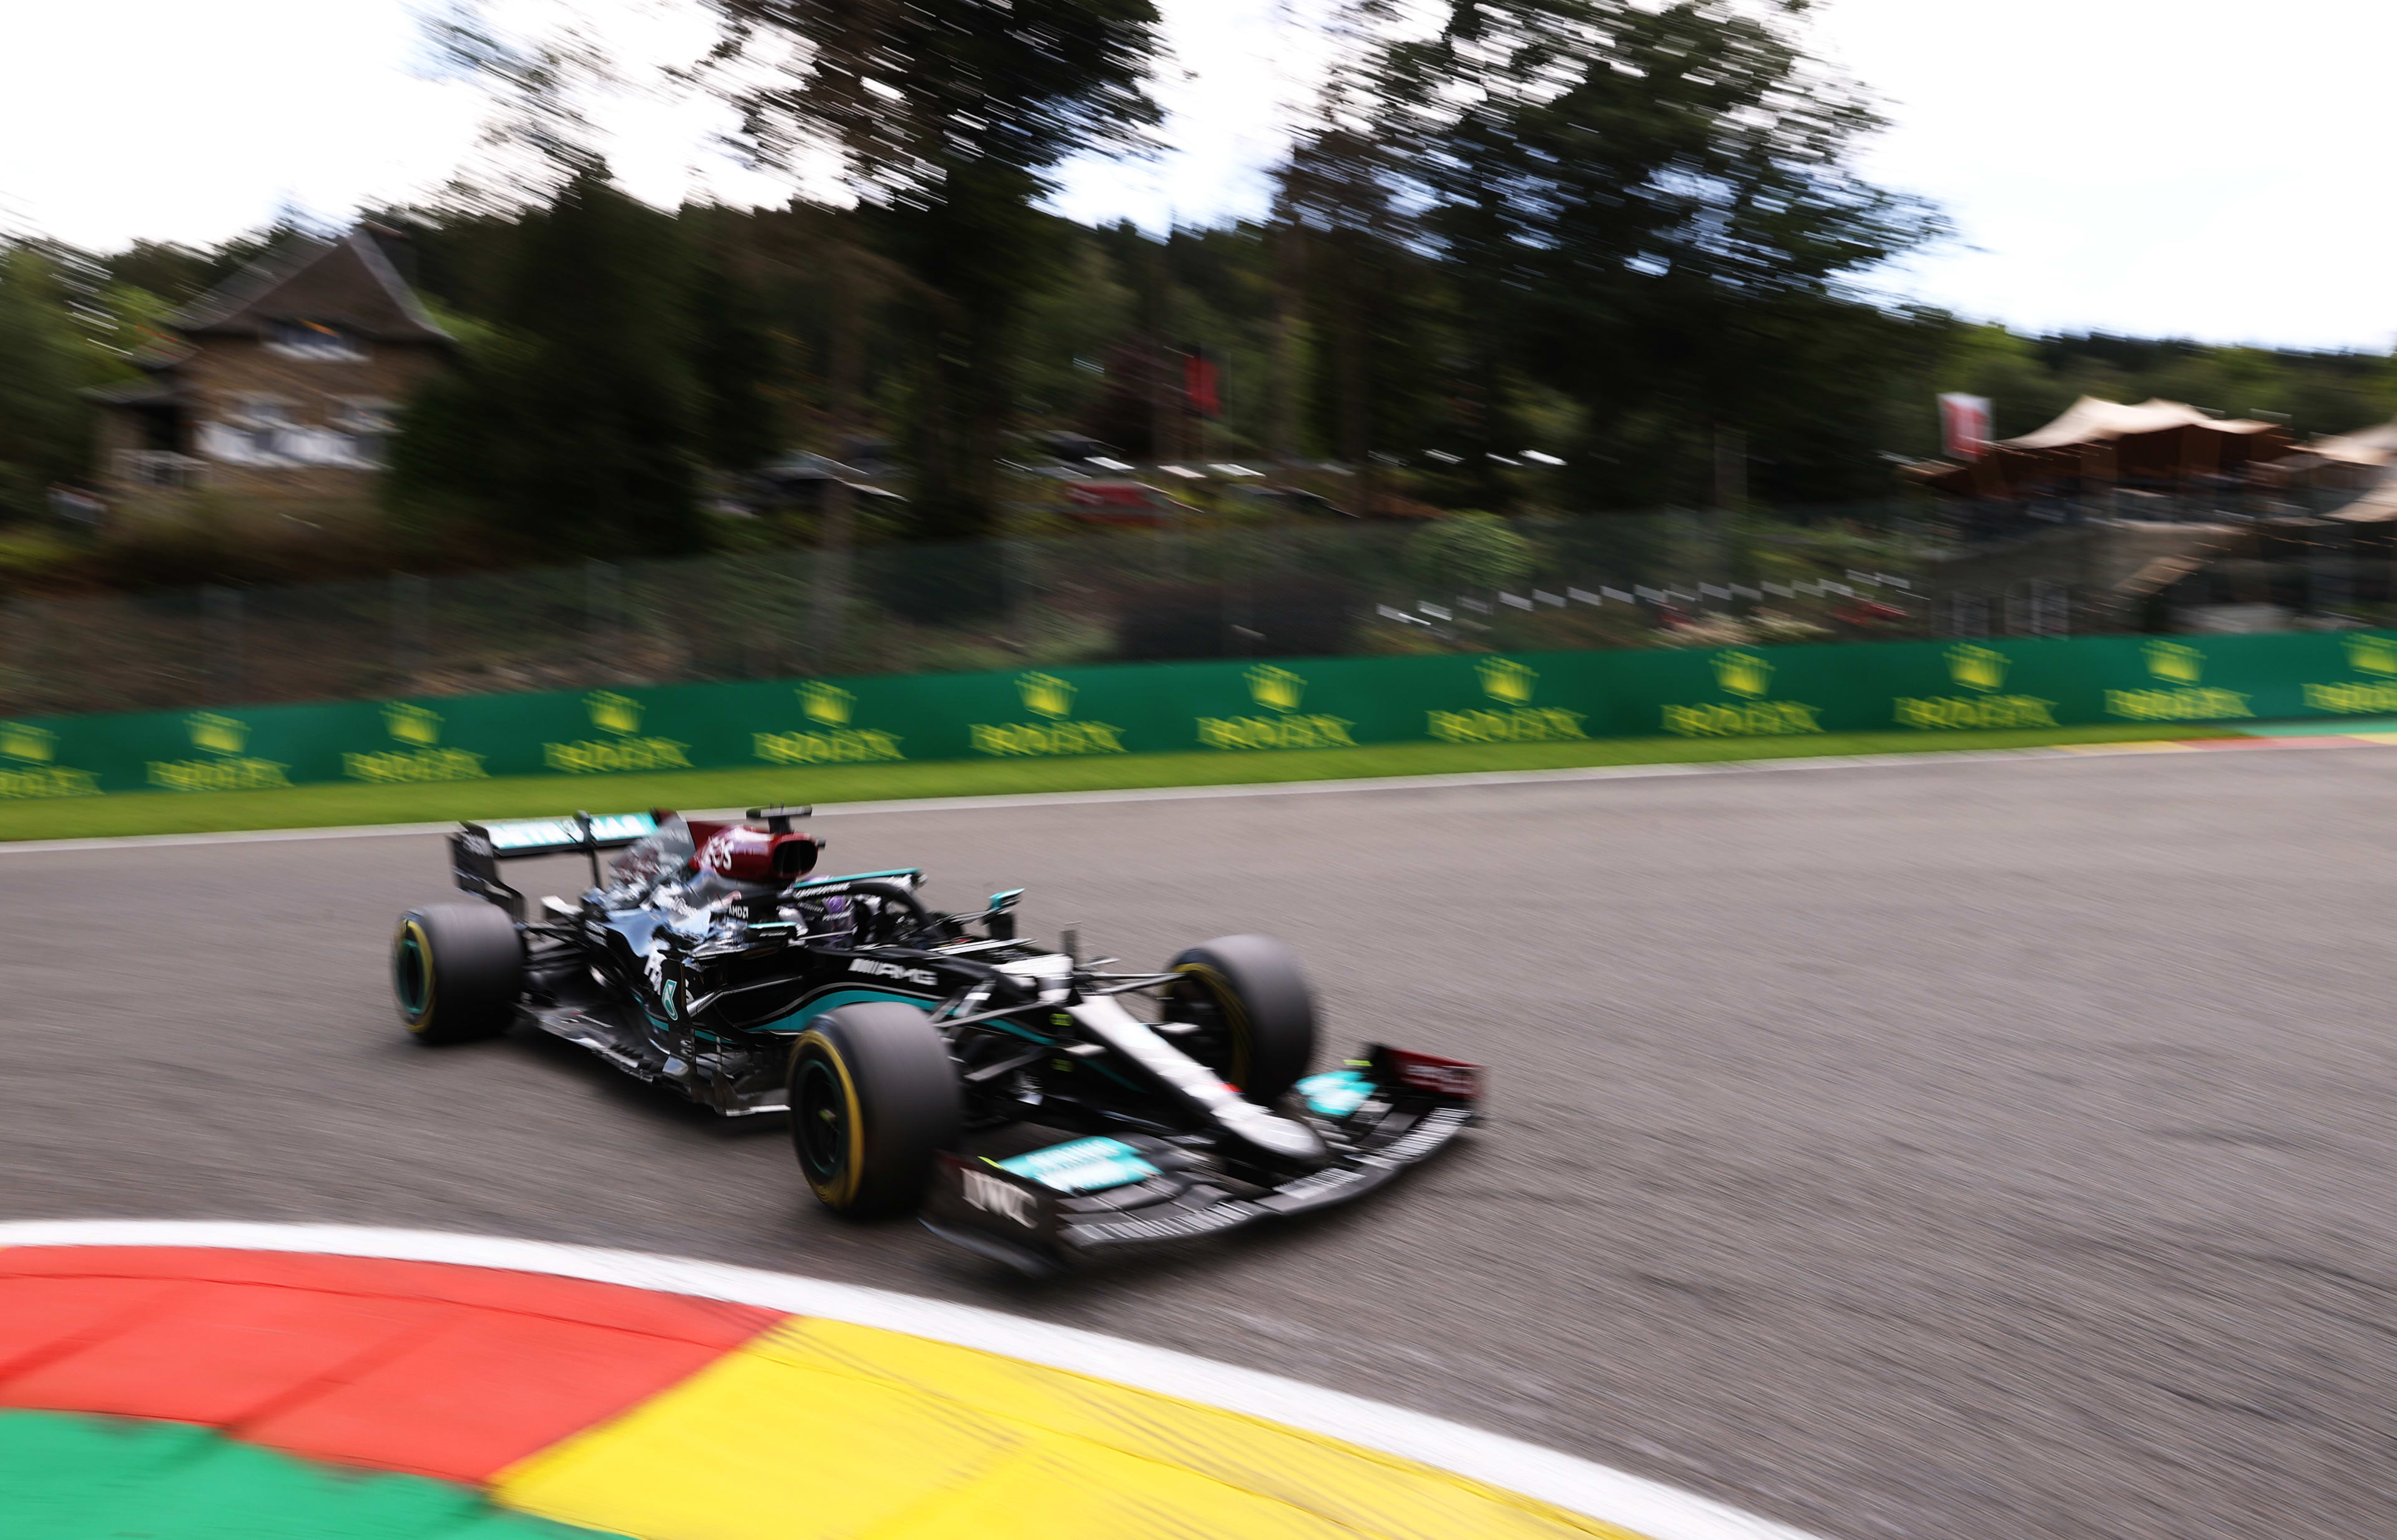 The car wasnt quite underneath me today says Hamilton as Mercedes search for gains at Spa Formula 1®